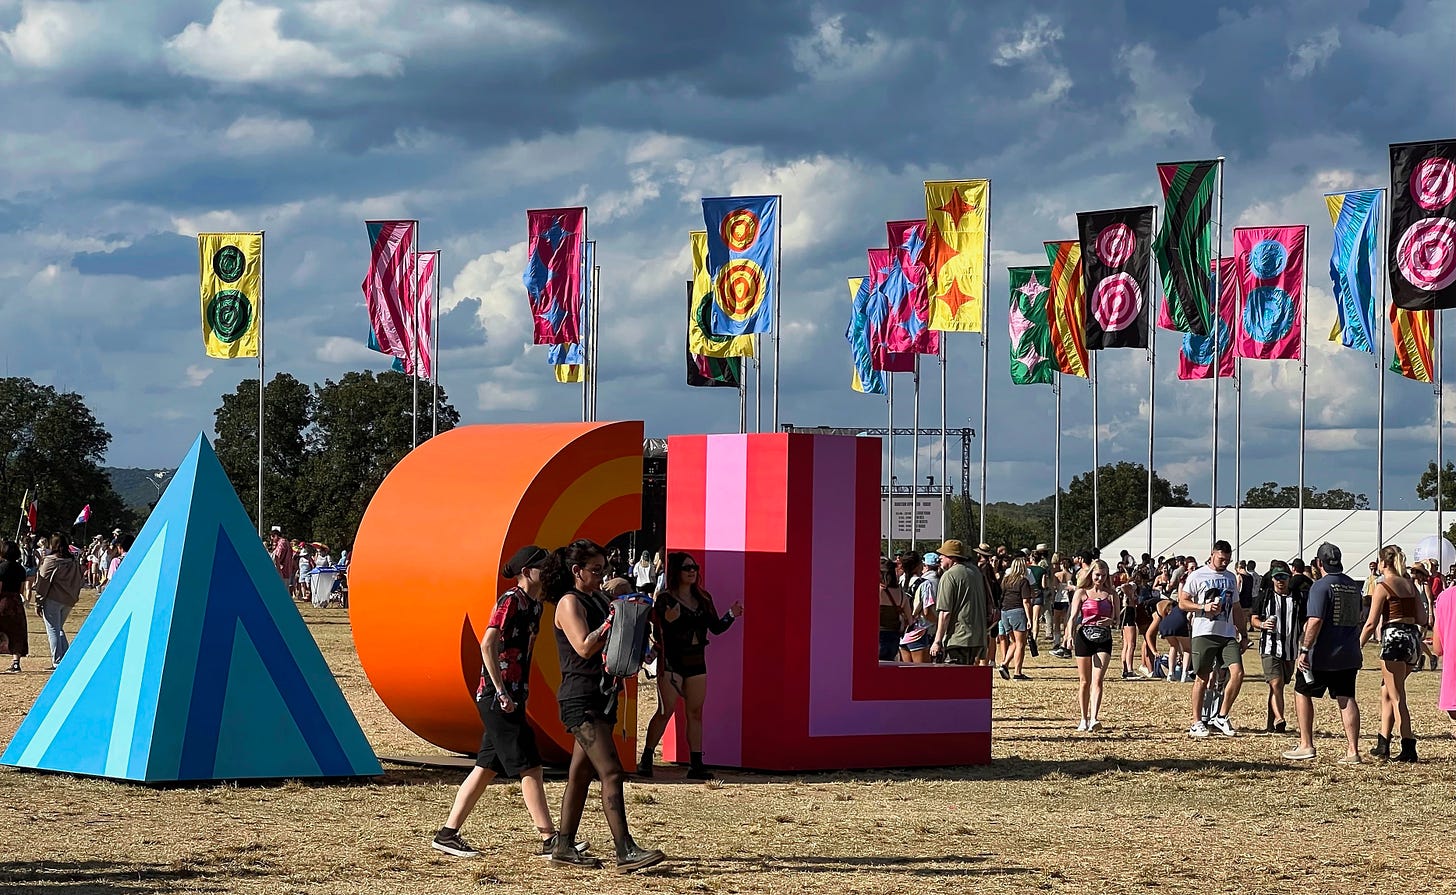 Colorful large block letters, A with shades of blue stripes, C in shades of orange stripes, and L with red and pink stripes, sit in the liddle of Zilker park. Colorful flags wave against a stormy clouds as people mingle around the park. A music stage sits in the background.